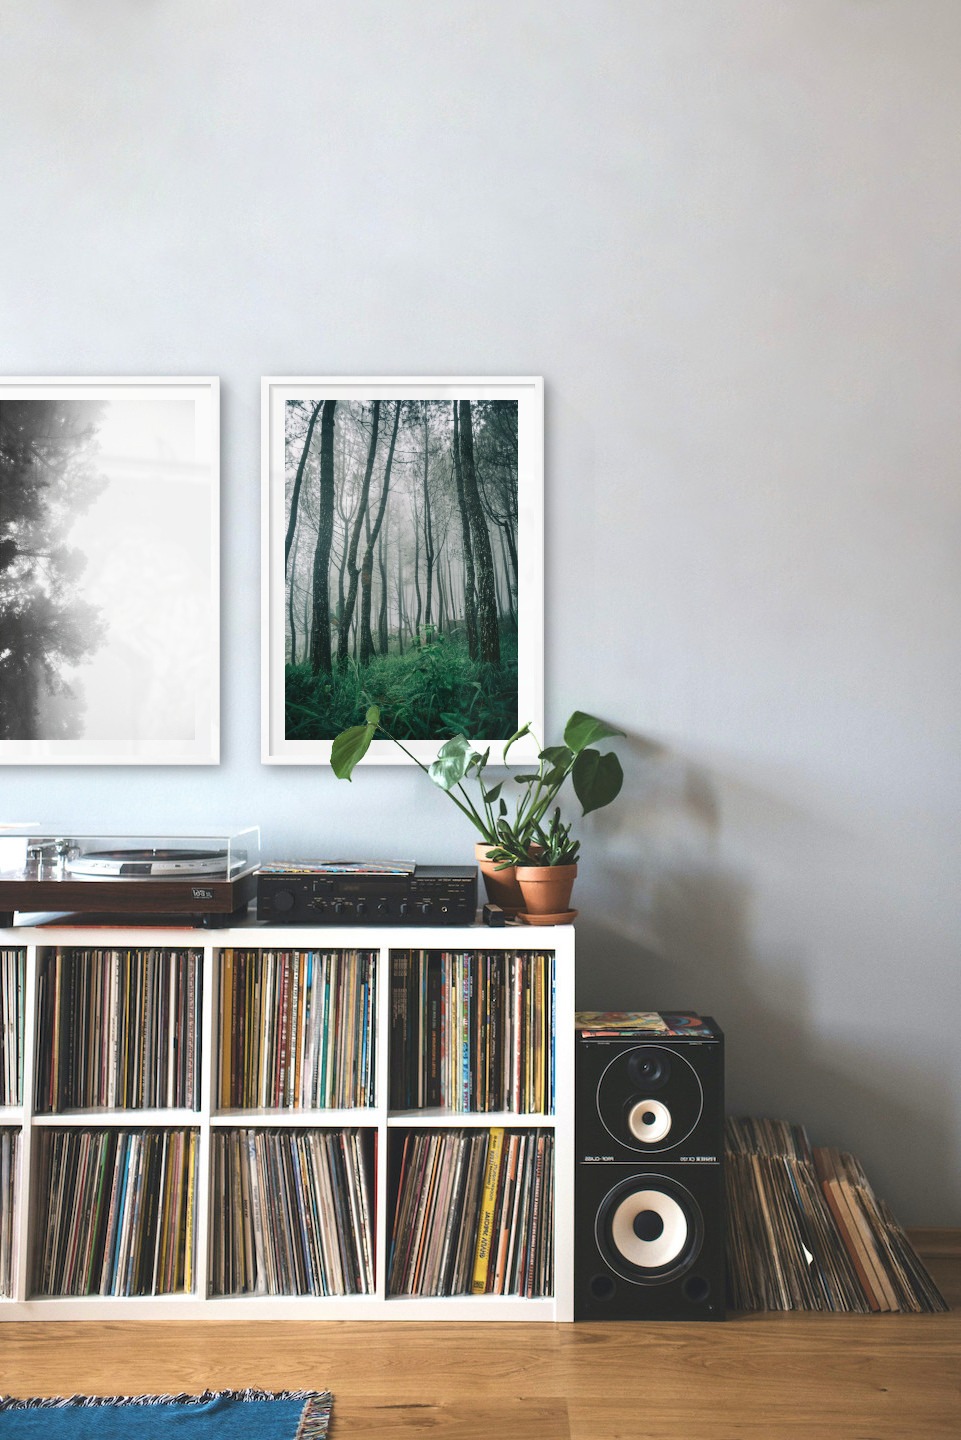 Gallery wall with picture frames in white in sizes 50x70 with prints "Foggy wooden tops from the side" and "Tall trees"